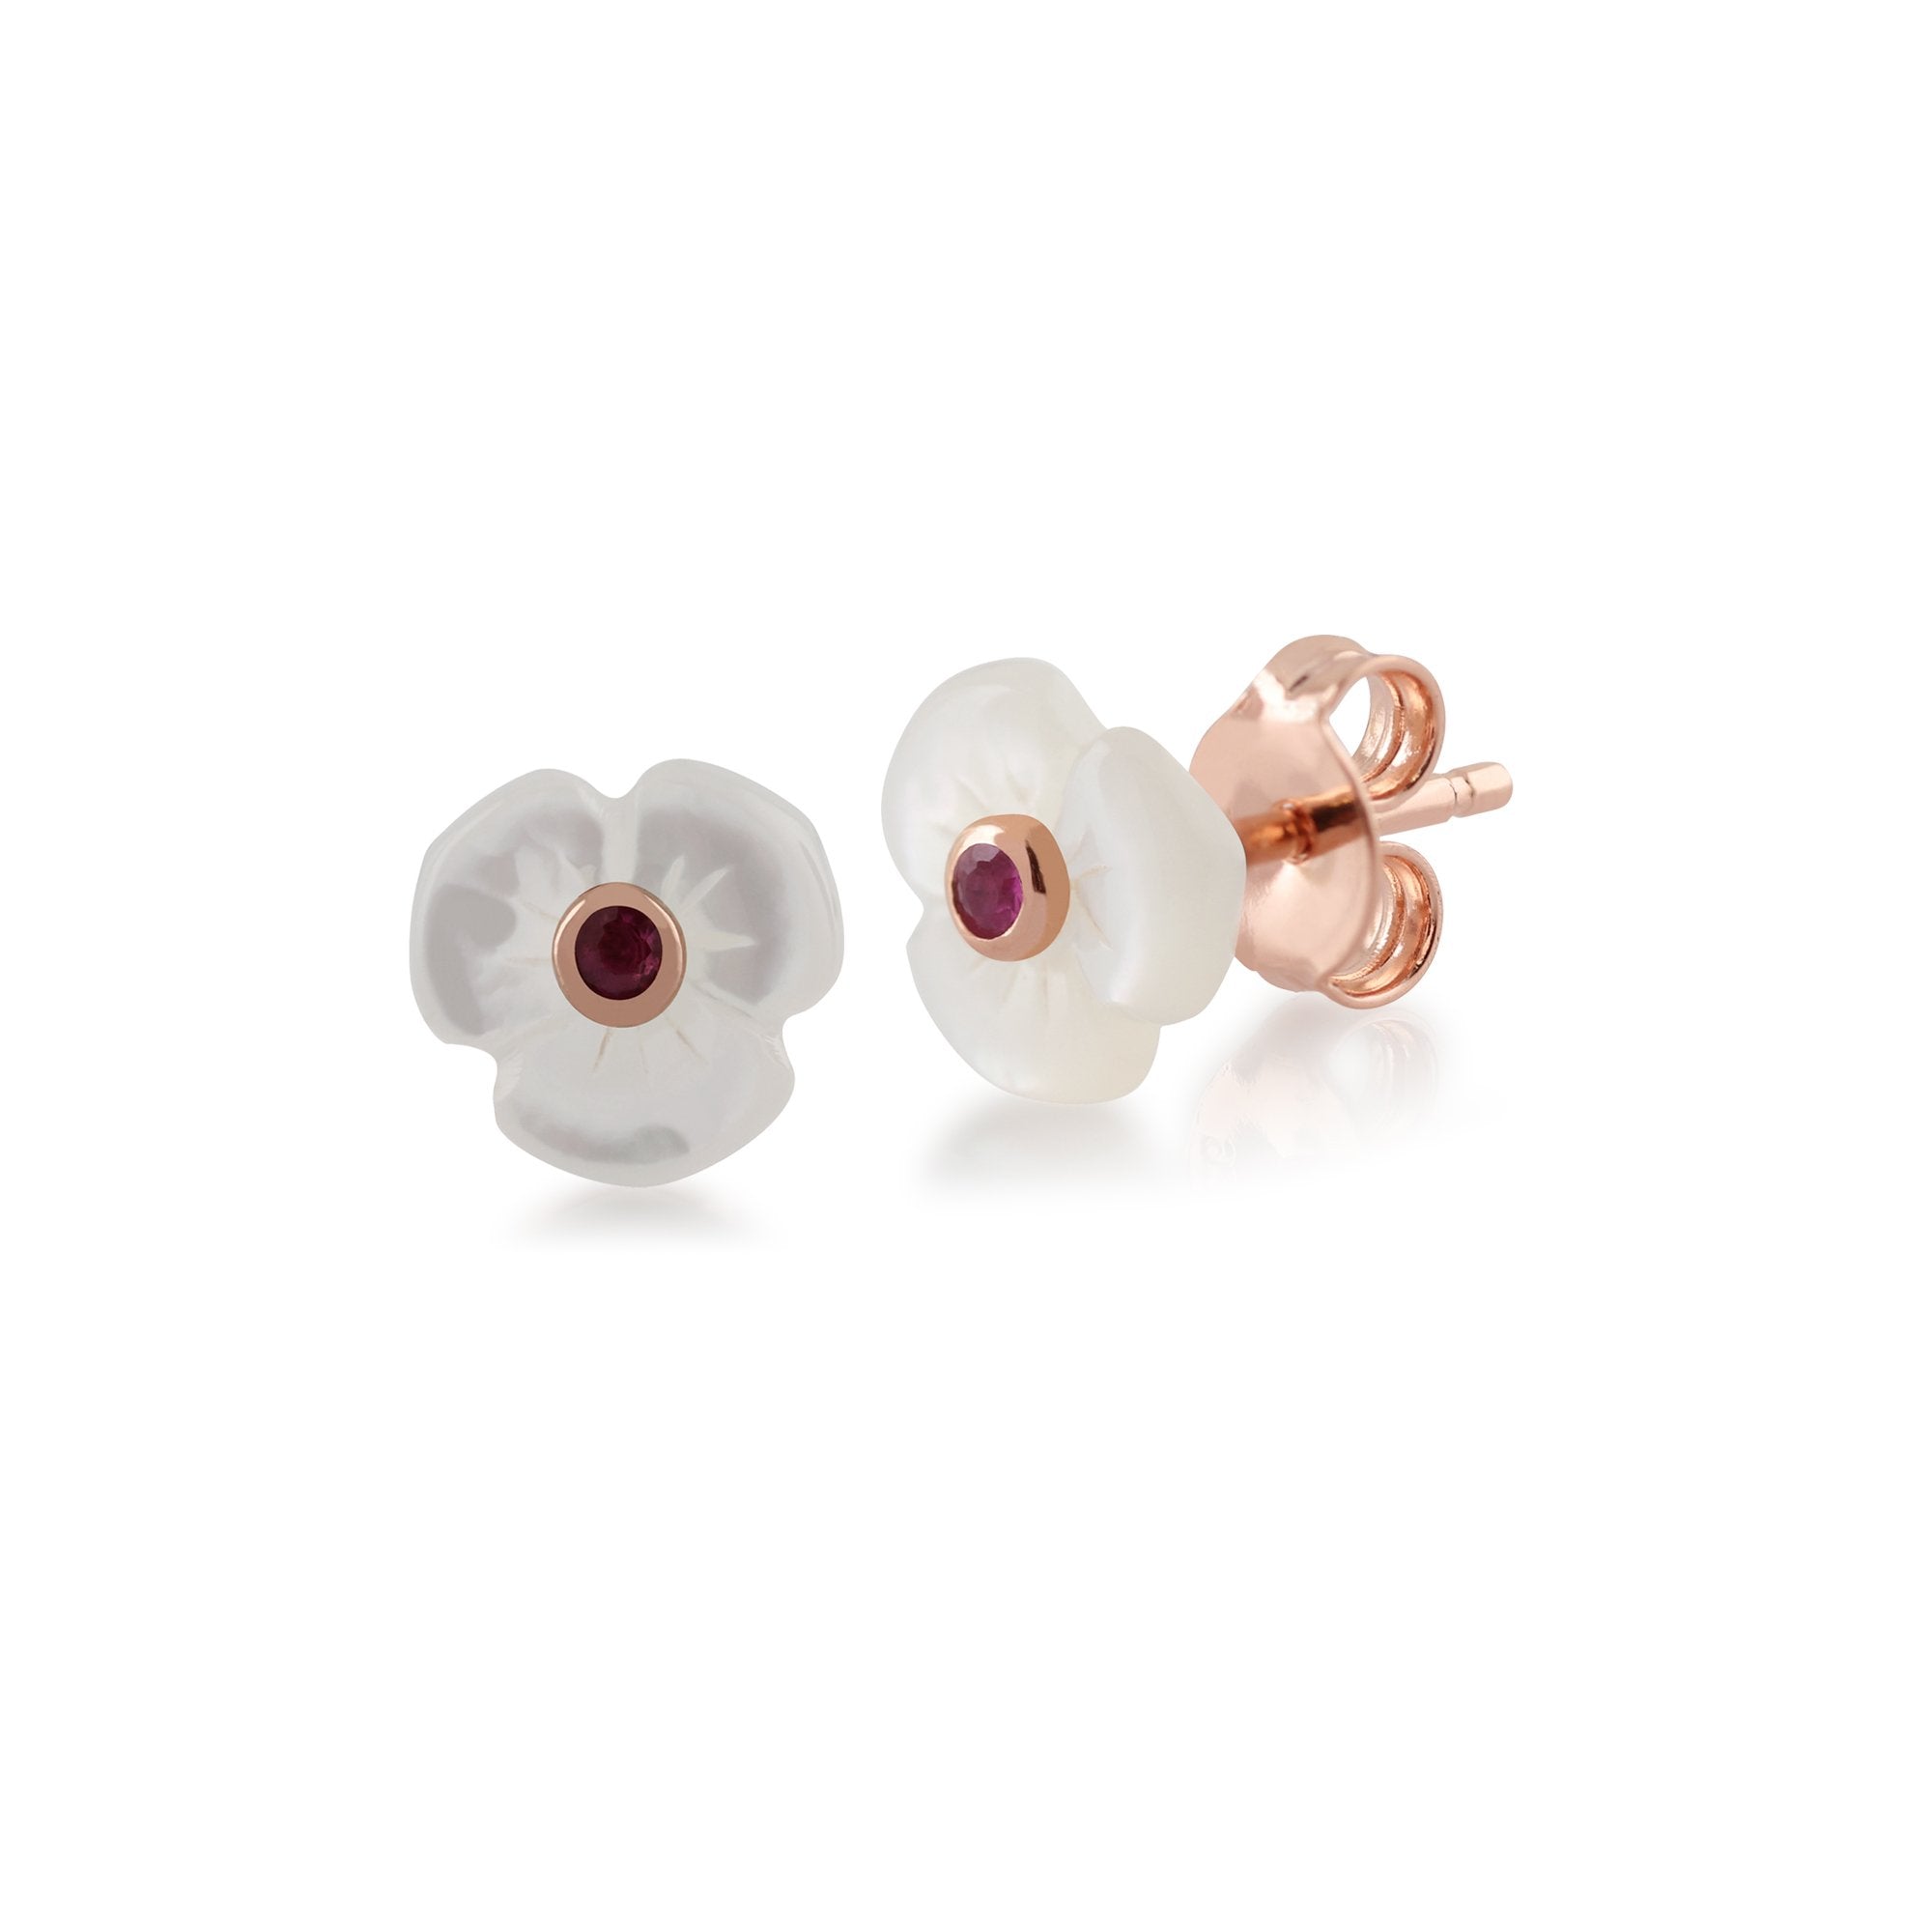 Floral Mother of Pearl & Round Ruby Poppy Stud Earrings in Rose Gold Plated 925 Sterling Silver